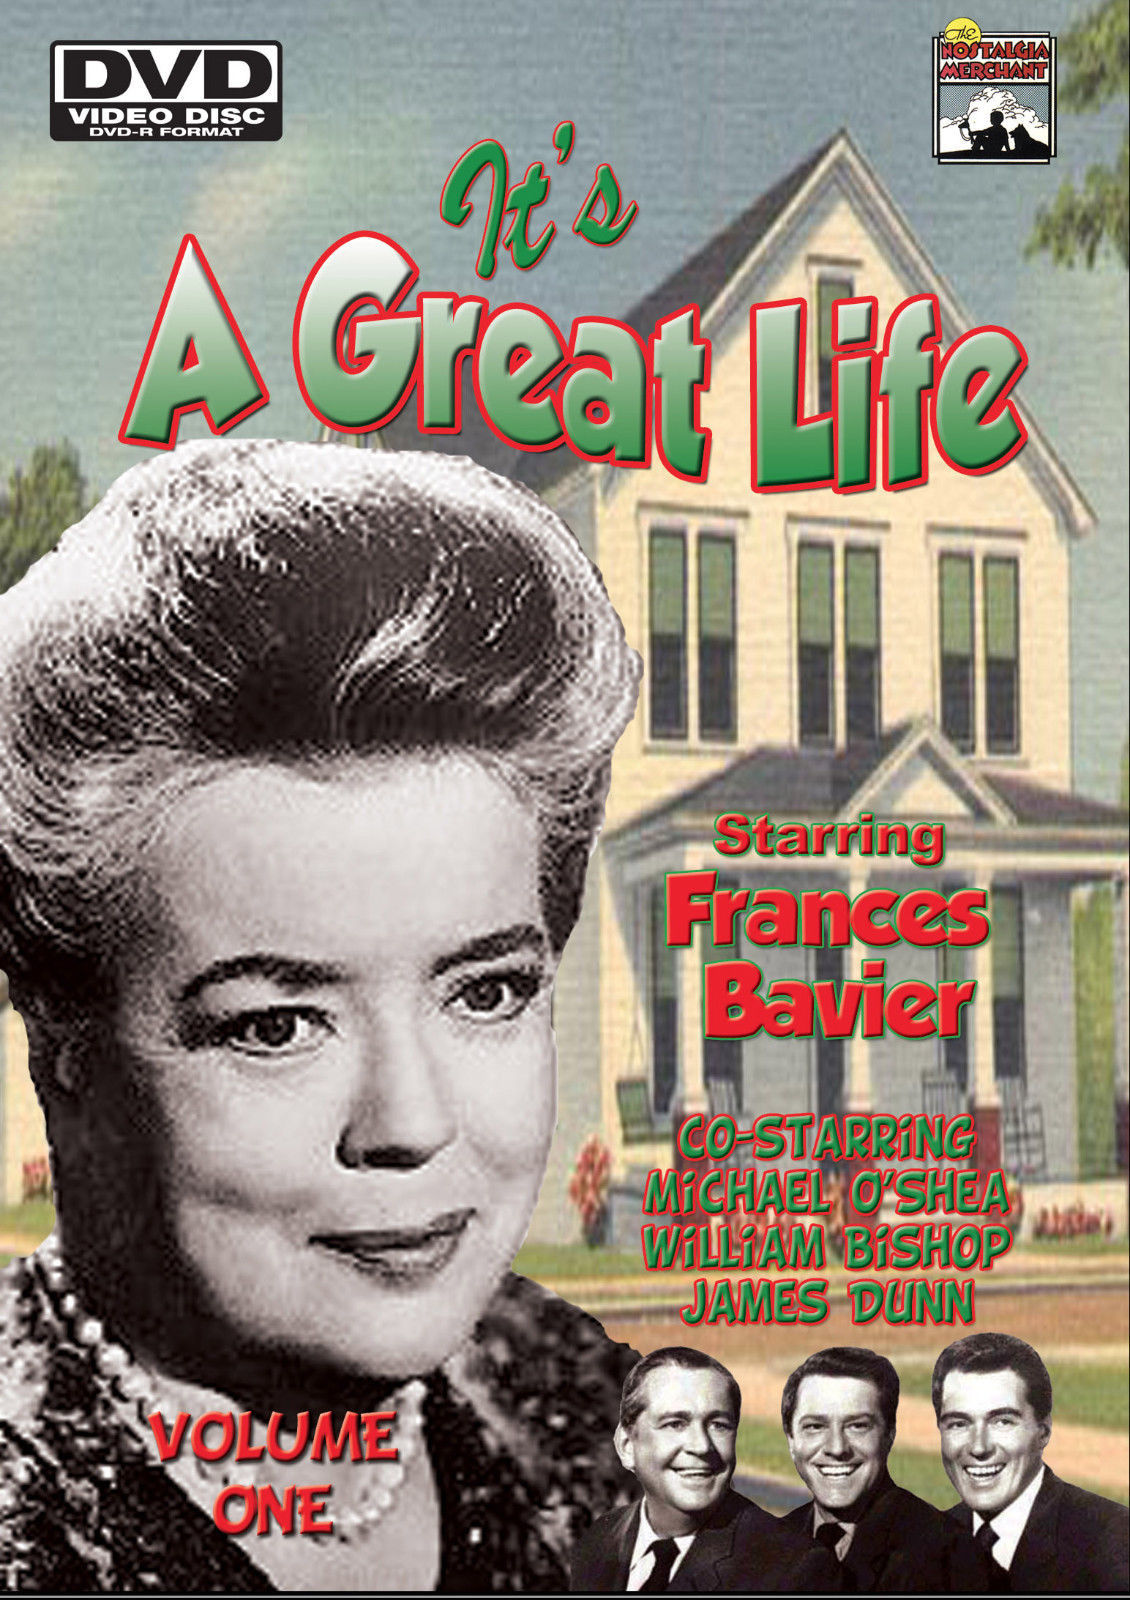 It's A Great Life - starring Frances Bavier